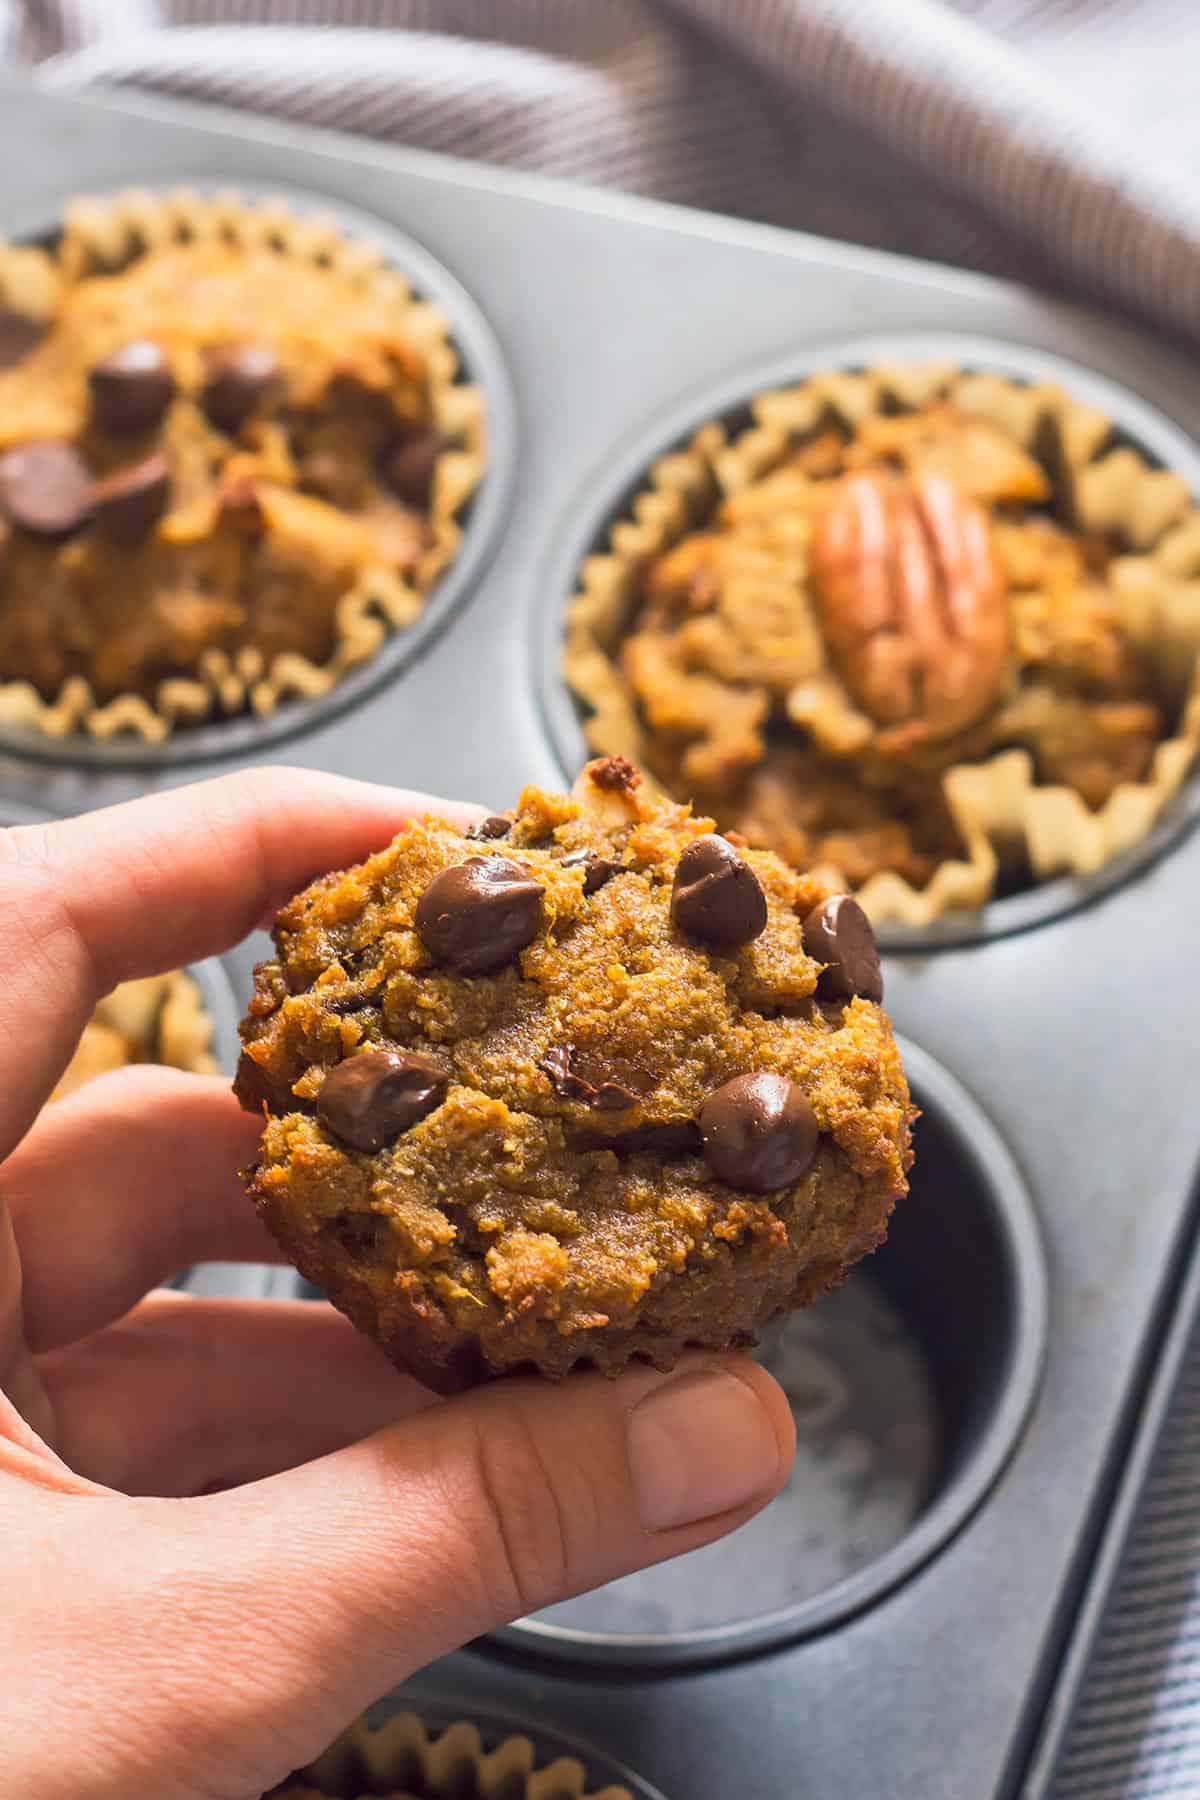 Hand Holding Chocolate Chip Muffin